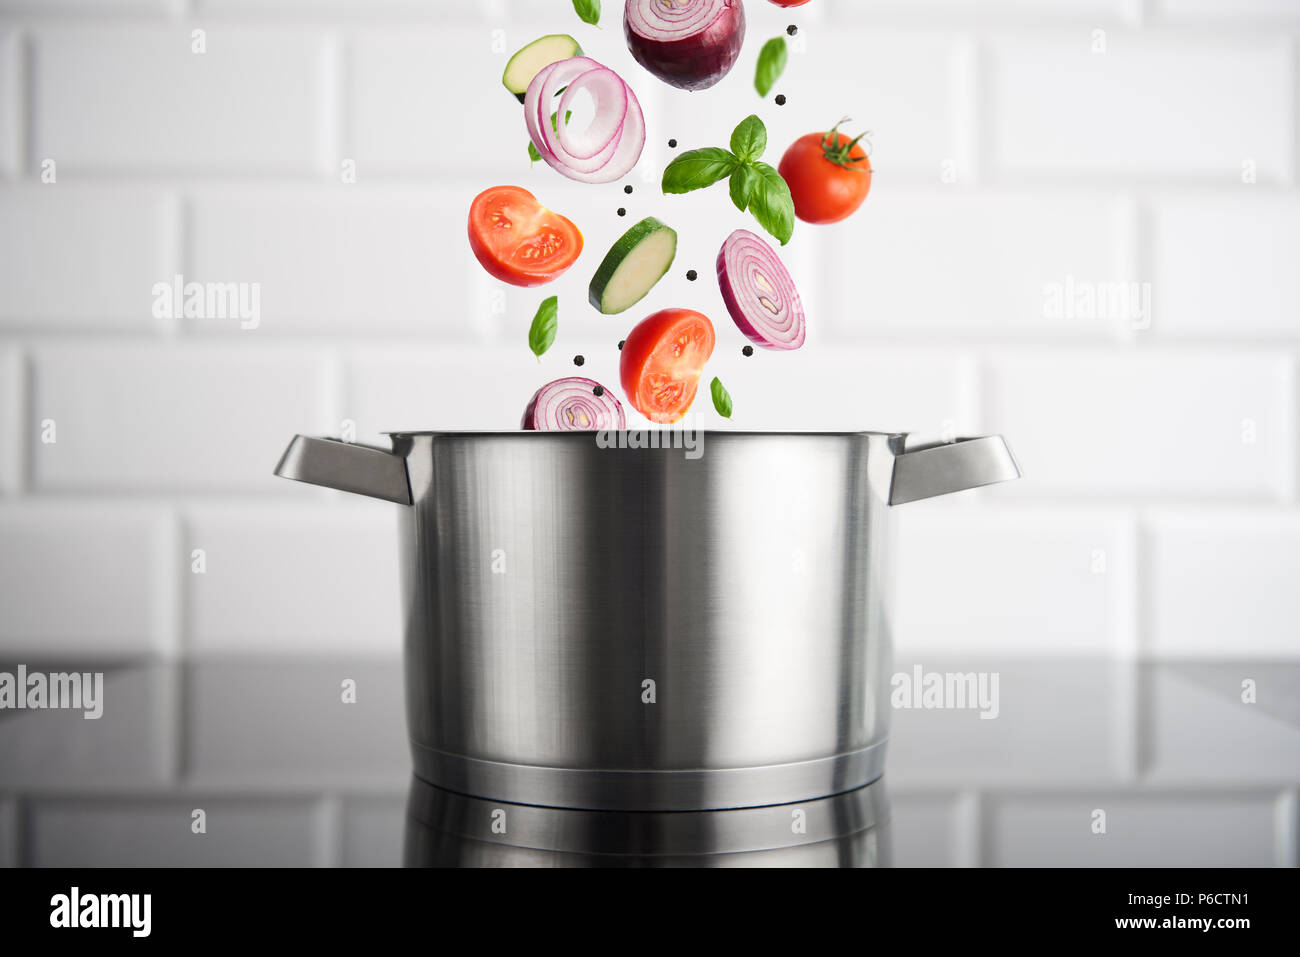 https://c8.alamy.com/comp/P6CTN1/healthy-eating-stainless-steel-pot-with-vegetables-on-the-induction-stove-with-white-metro-tiles-in-the-background-high-resolution-horizontal-P6CTN1.jpg